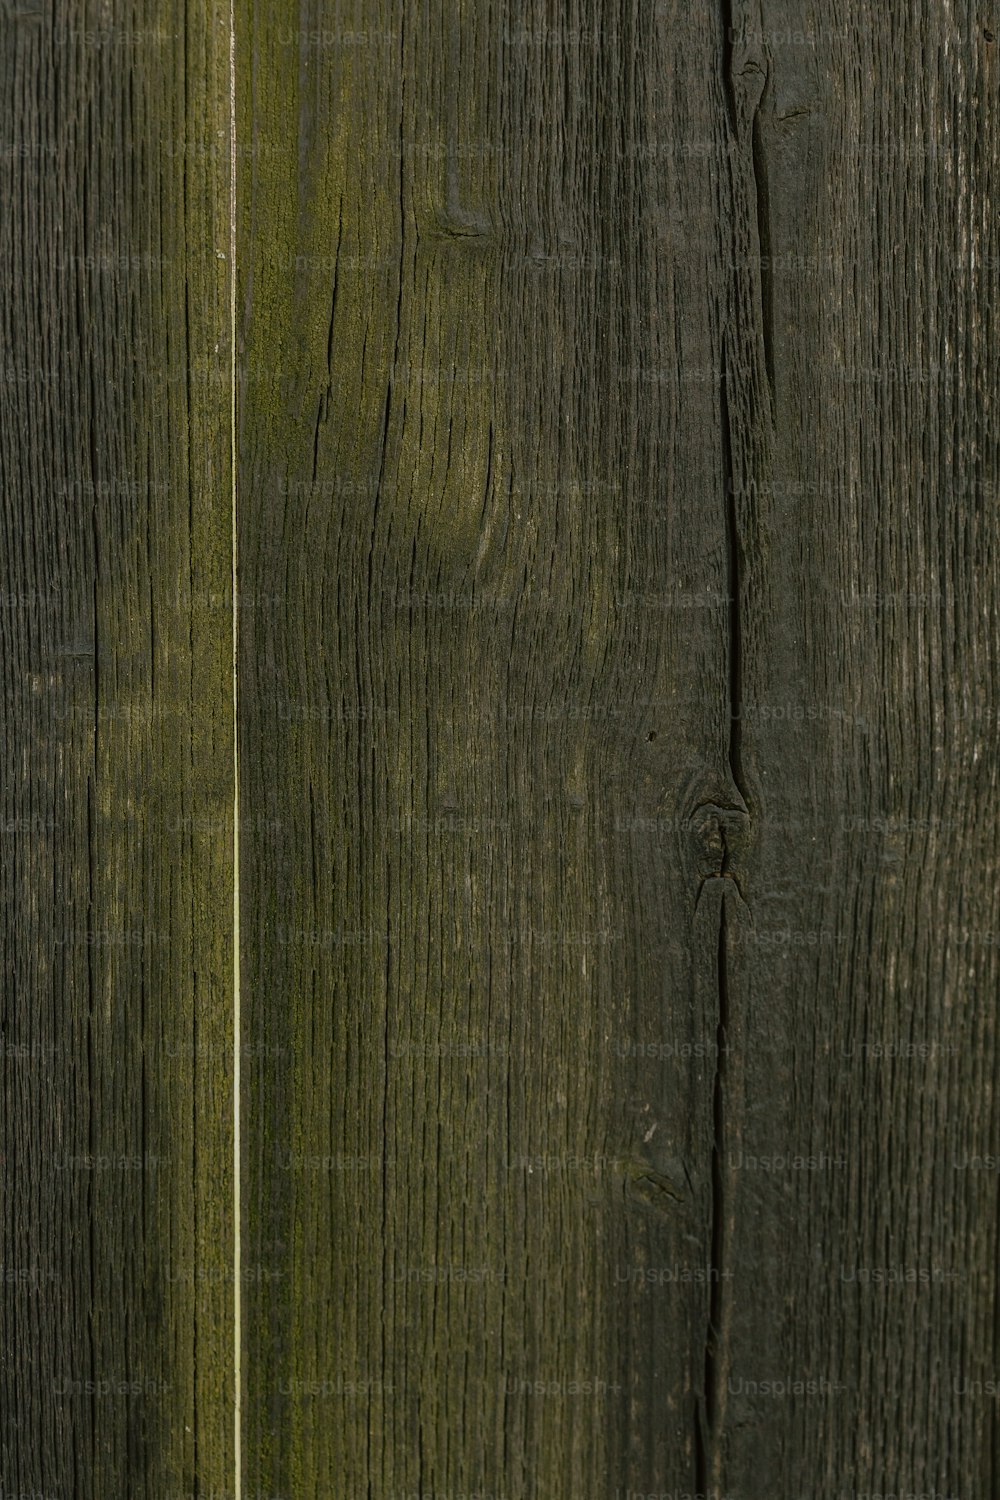 a close up of a wooden fence with a cell phone